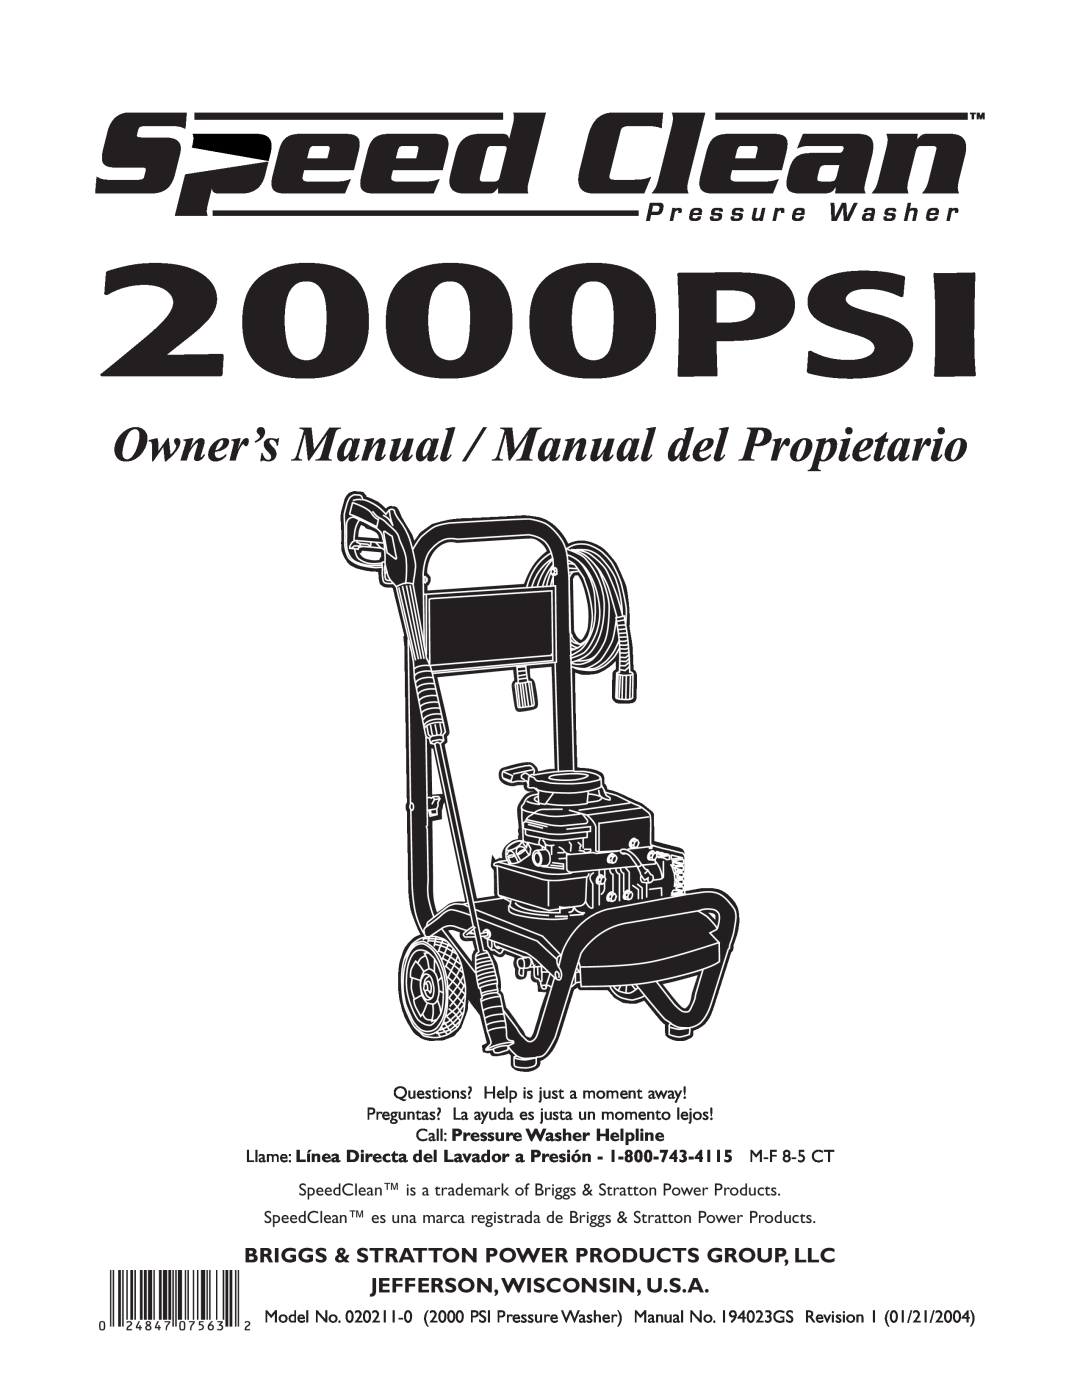 Briggs & Stratton 020211-0 owner manual Briggs & Stratton Power Products Group, Llc, Jefferson,Wisconsin, U.S.A, 2000PSI 